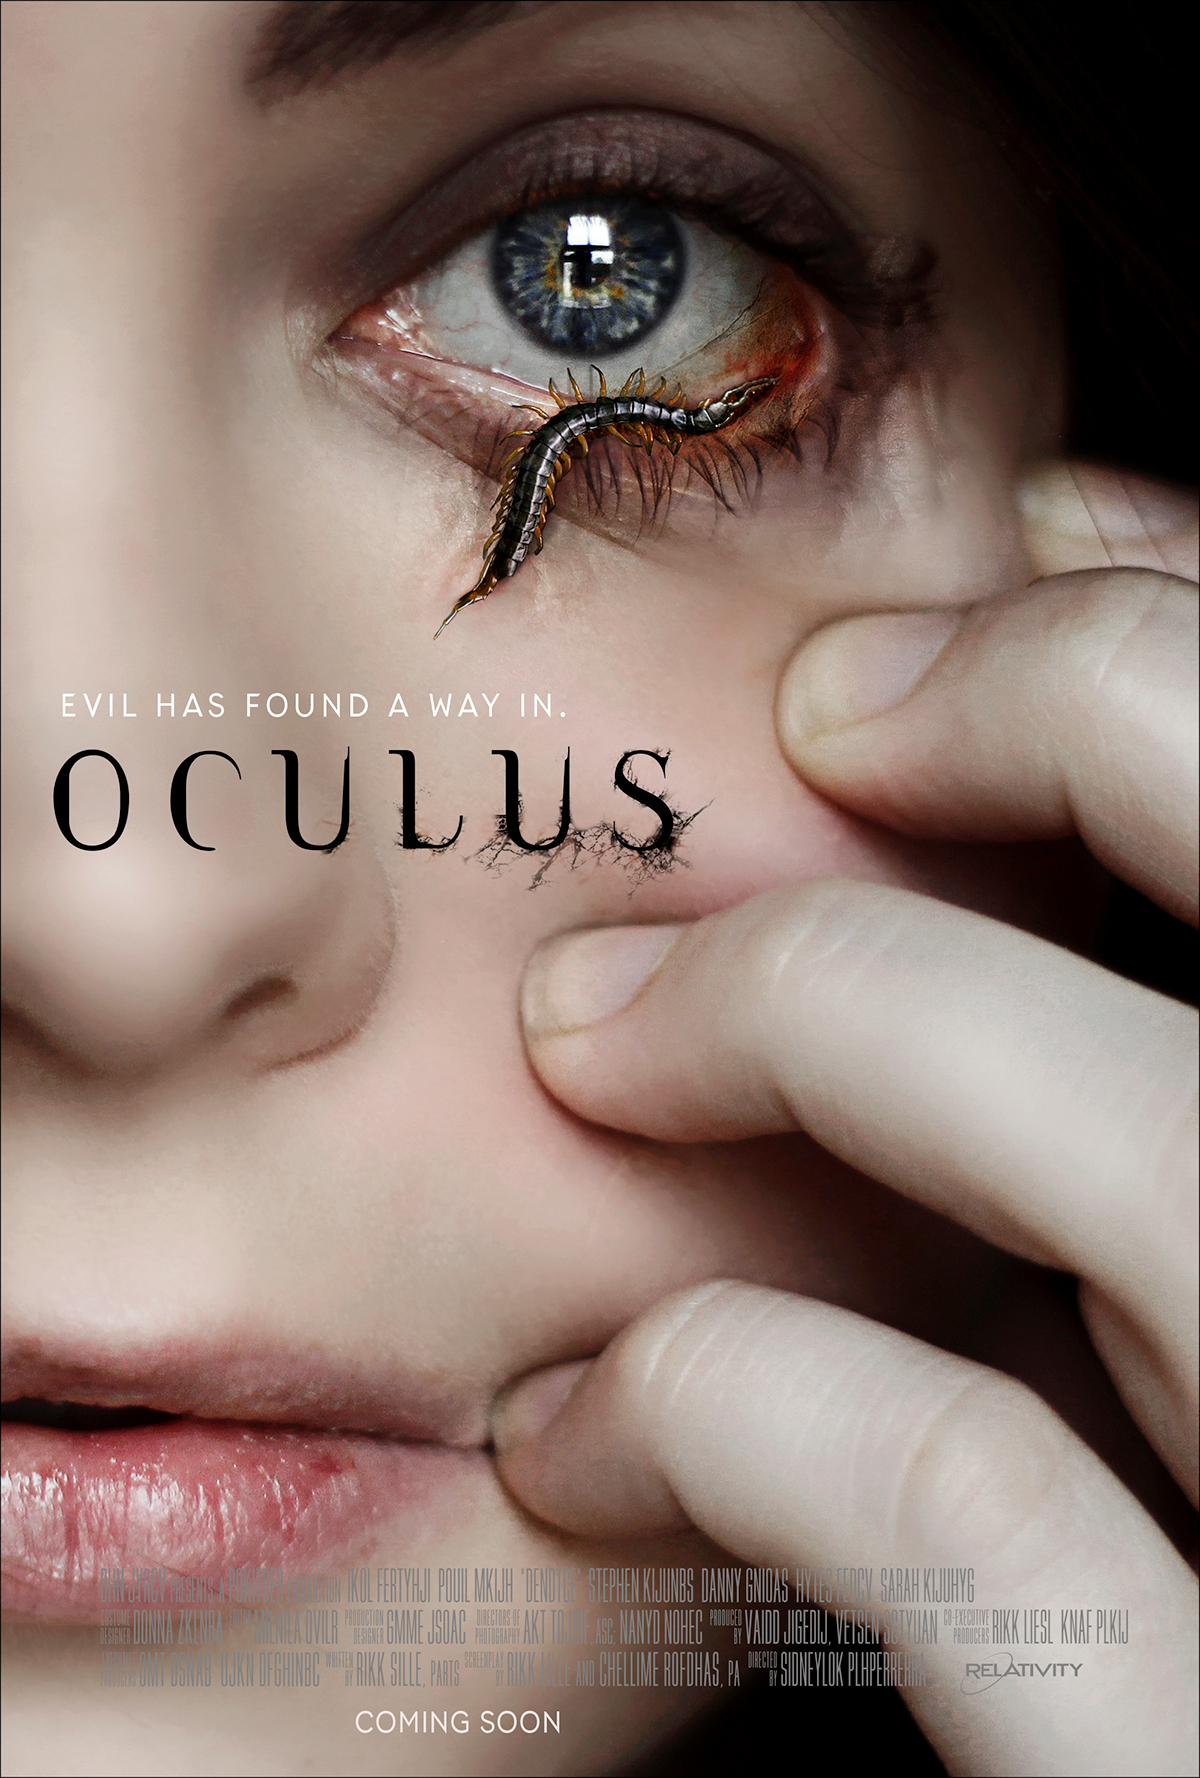 Theatrical one sheet Oculus movie